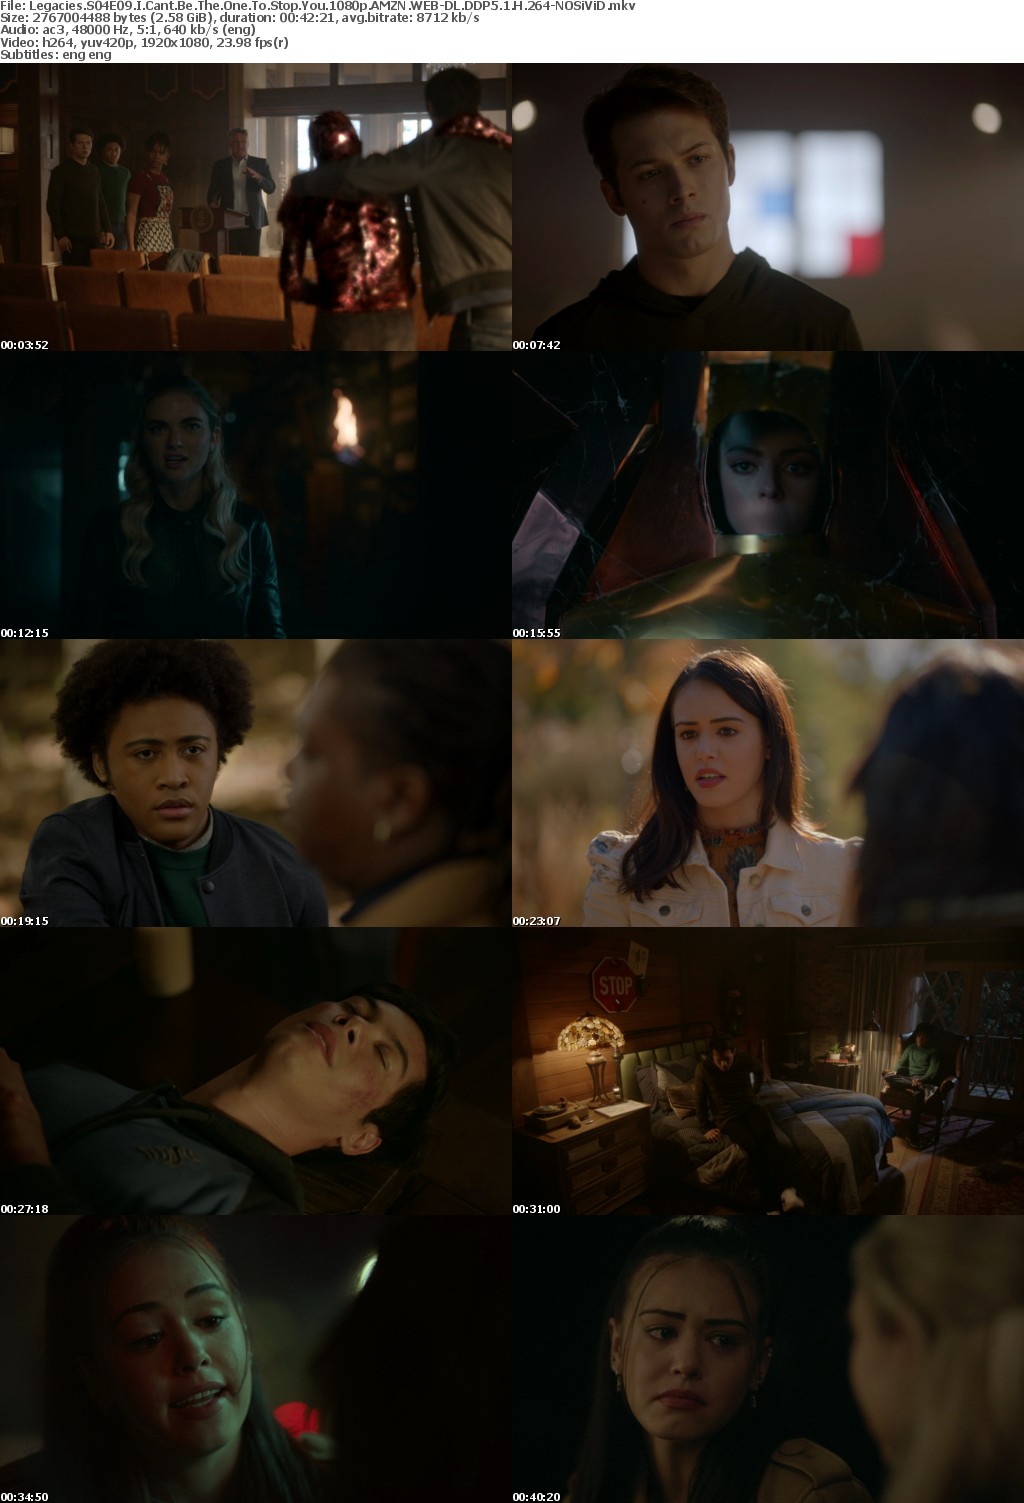 Legacies S04E09 I Cant Be The One To Stop You 1080p AMZN WEBRip DDP5 1 x264-NOSiViD